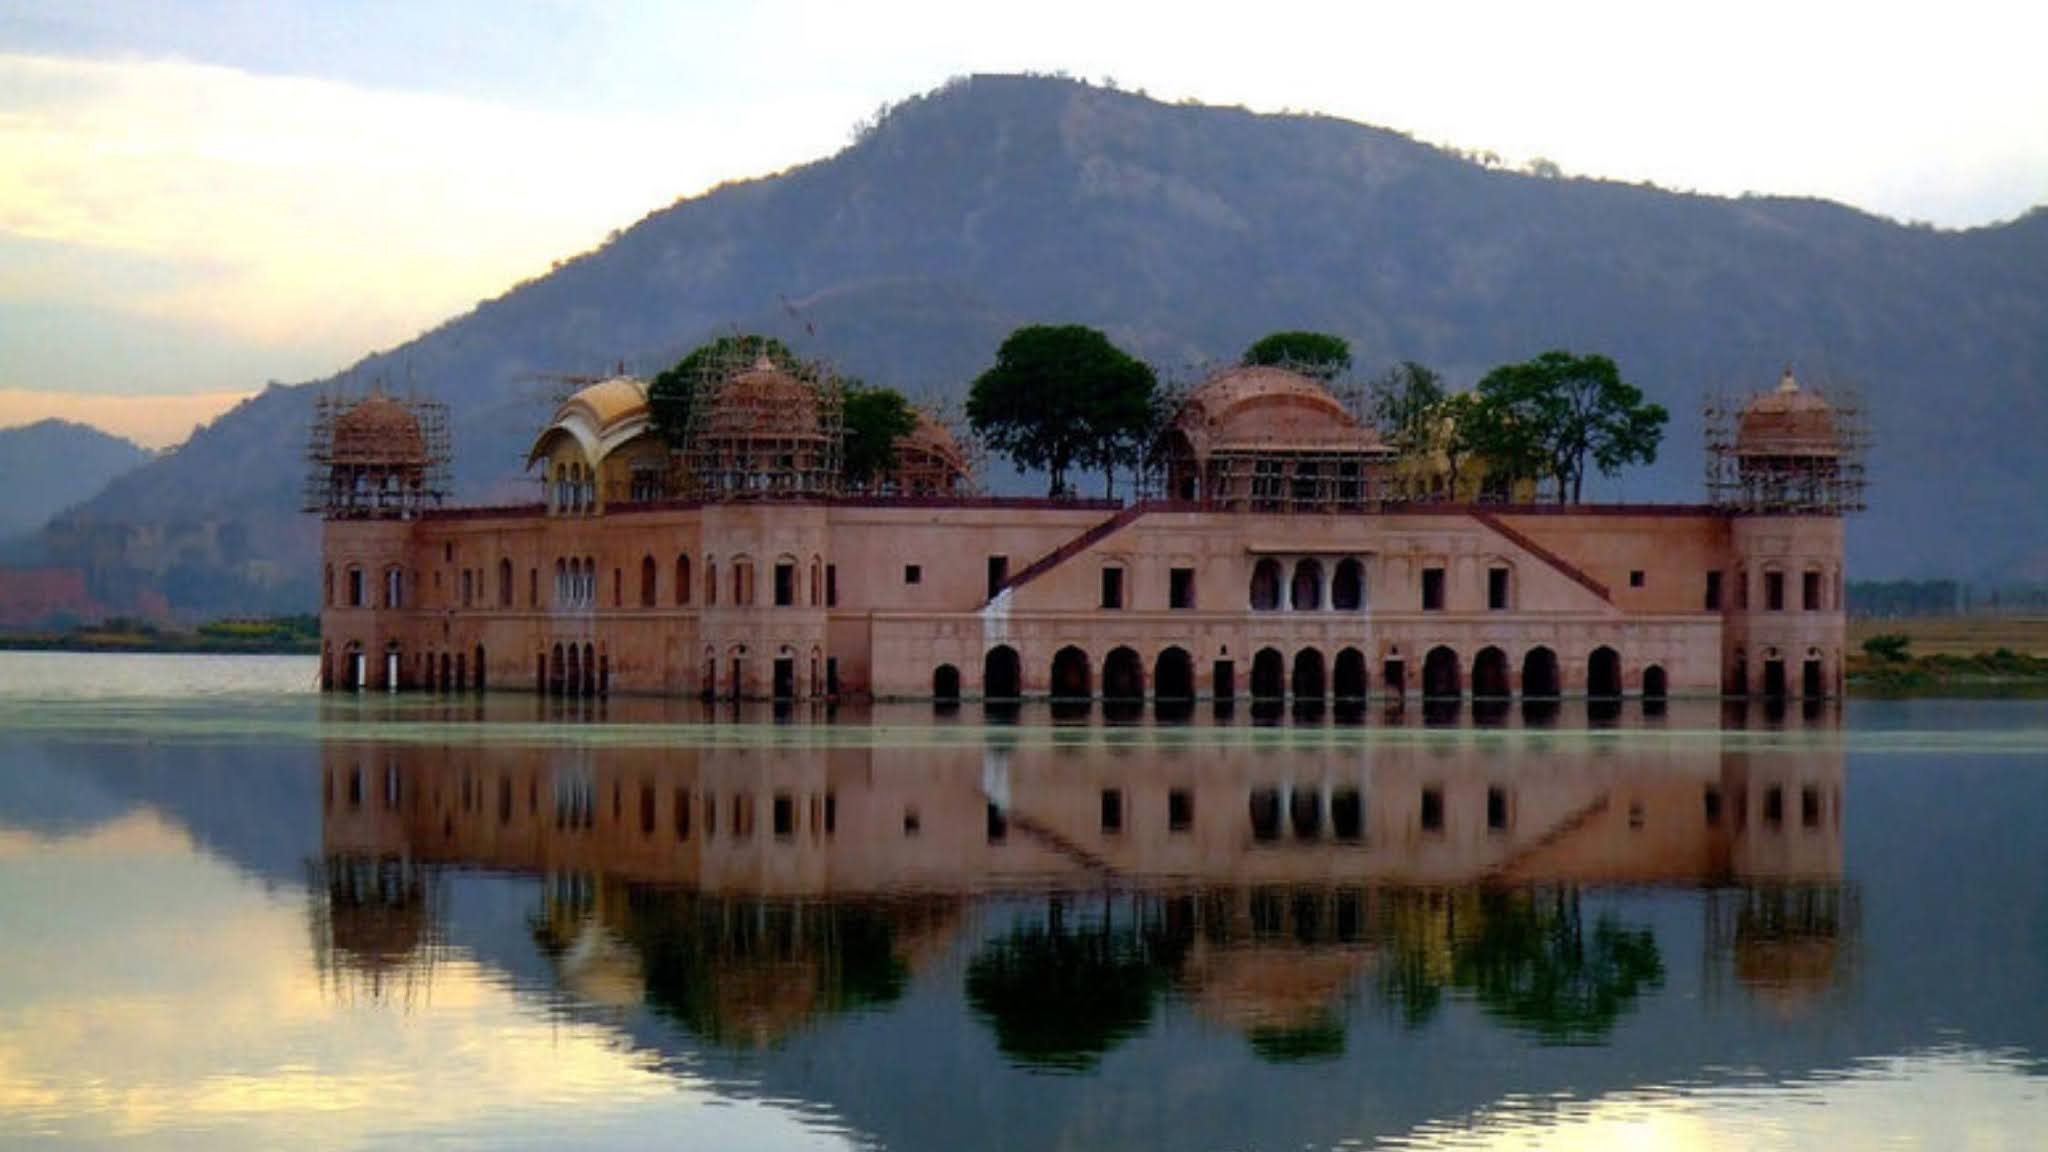 Jal Mahal of Rajasthan is amazing